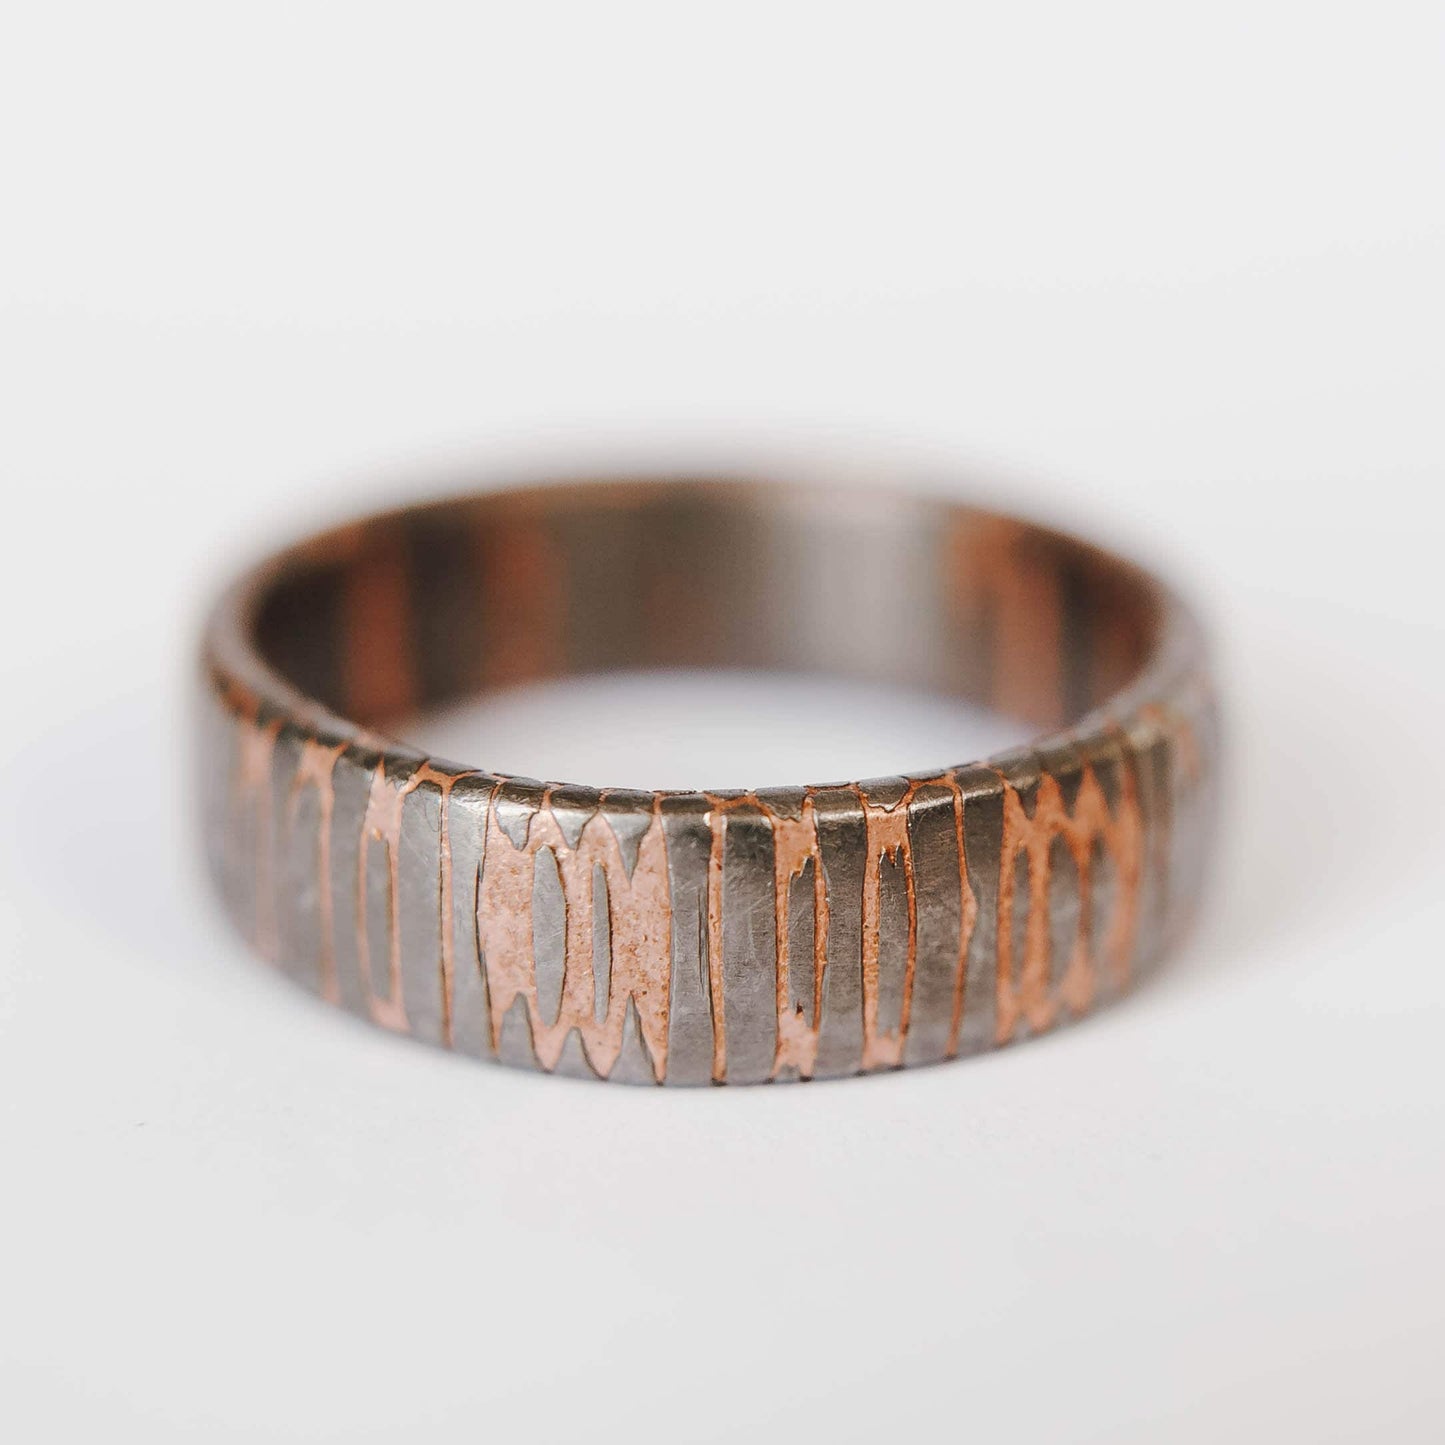 Superconductor wedding band. This photo shows an etched titanium-niobium and copper striped ring. (Horizontal with white background)